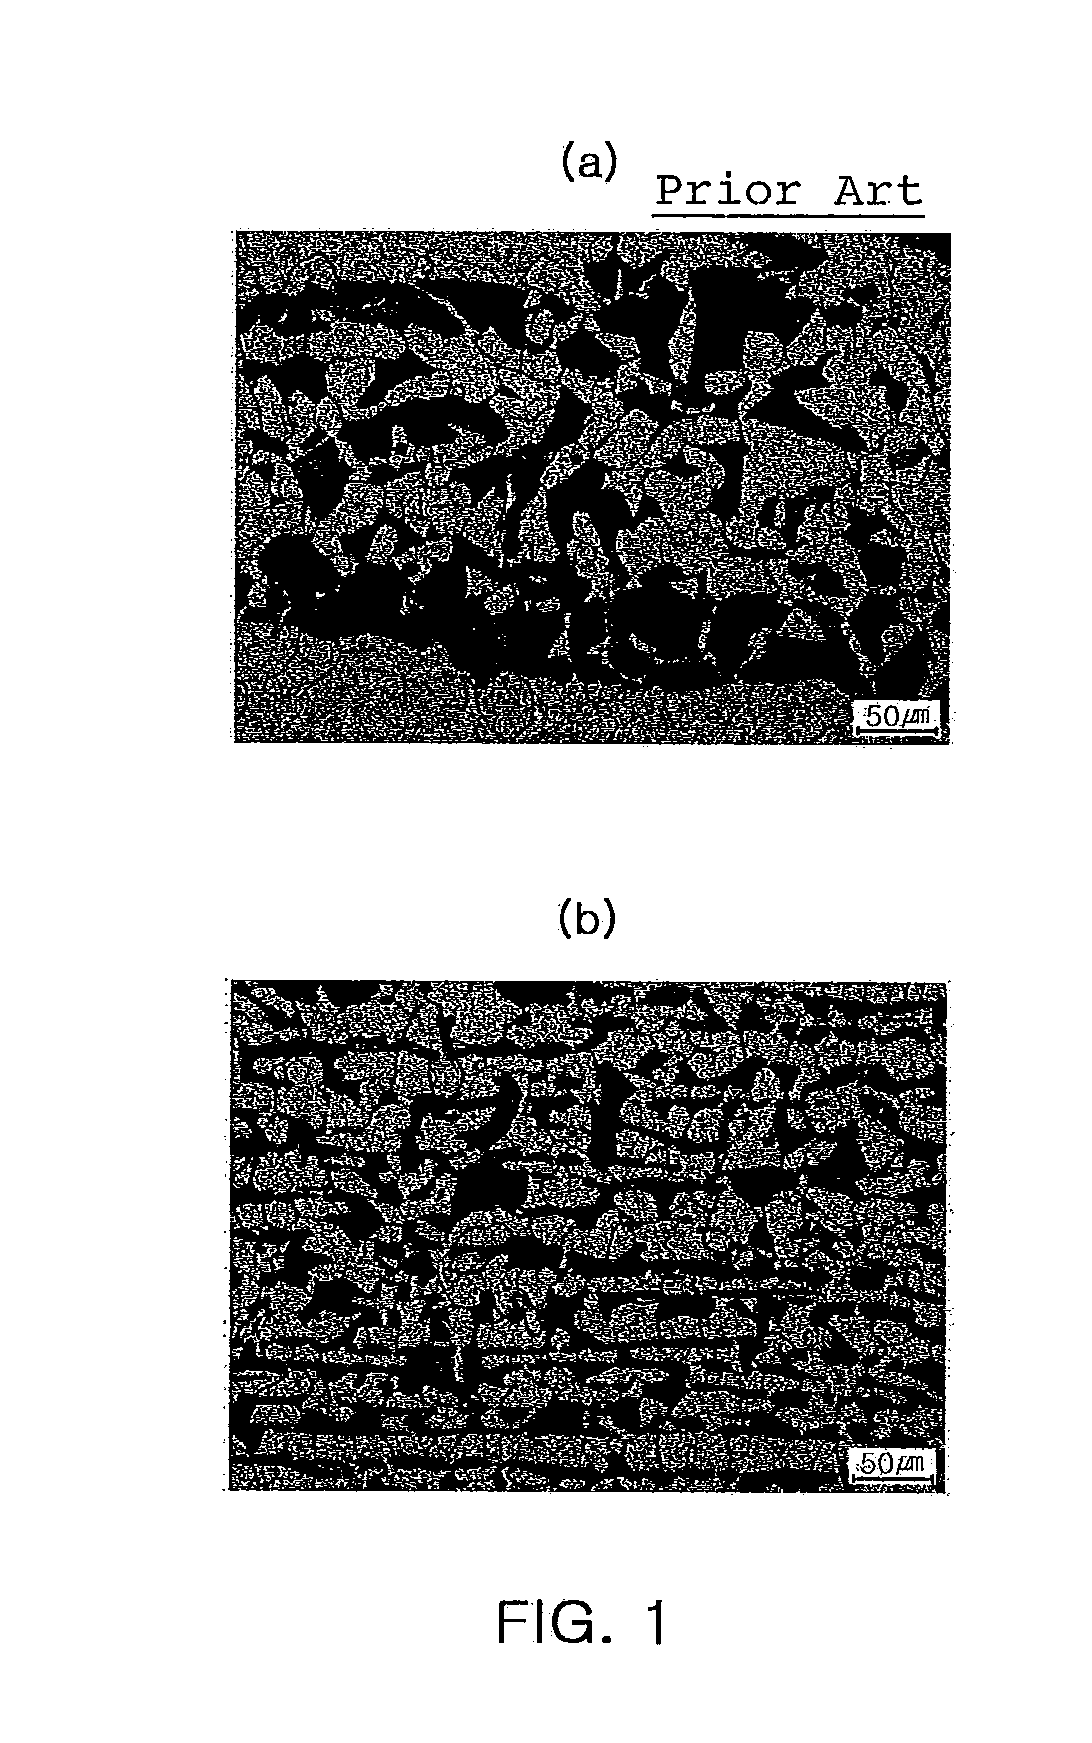 Wire rod having good superior surface properties, high strength, and high toughness, and a method for manufacturing same